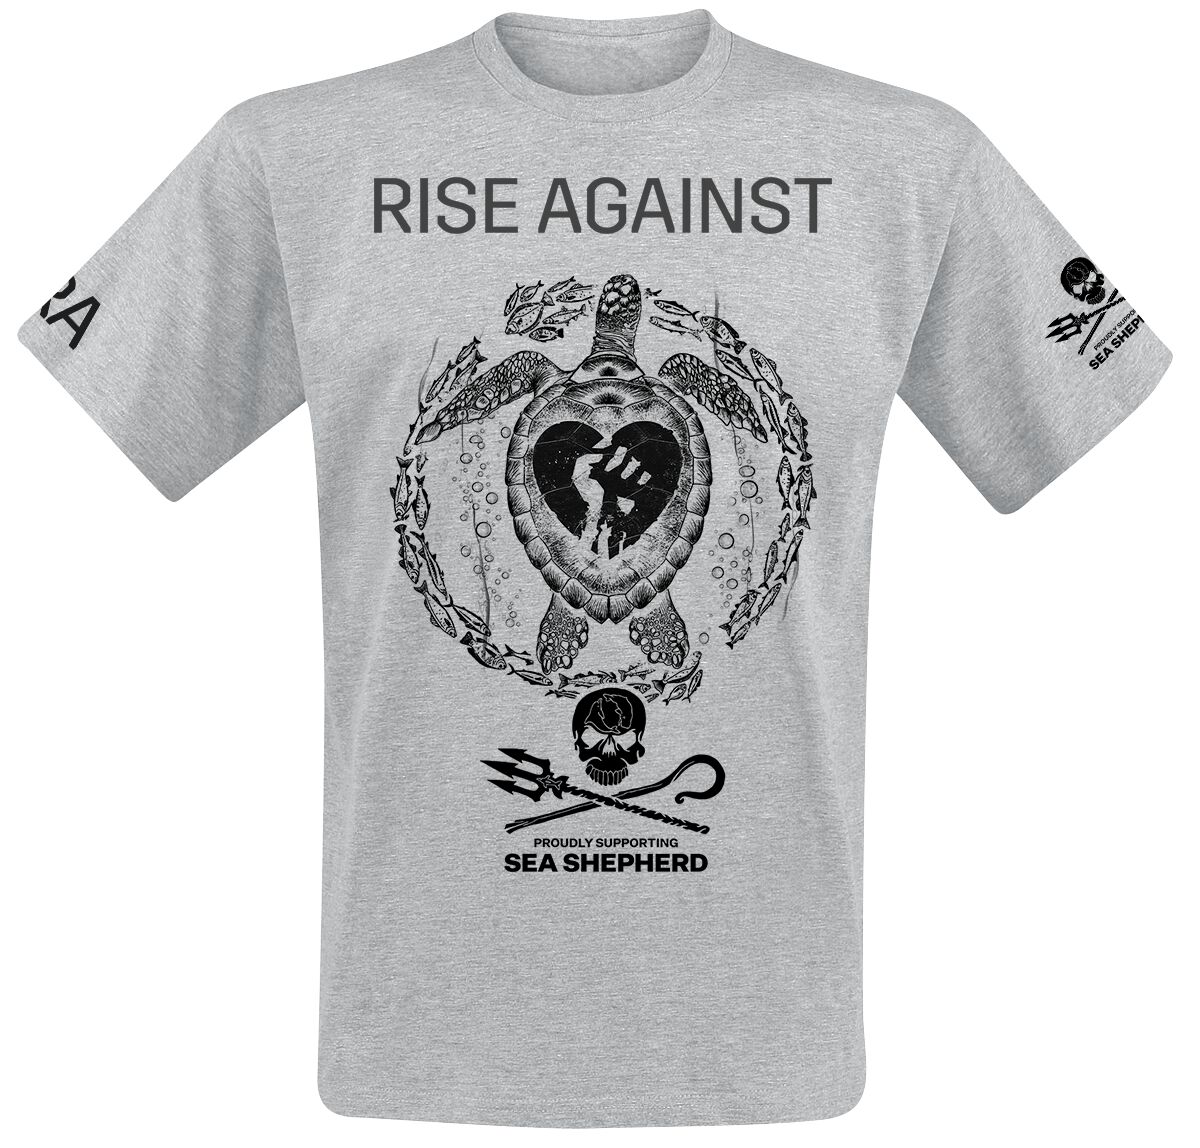 Rise Against Sea Shepherd Cooperation - Our Precious Time Is Running Out T-Shirt grau meliert in XL